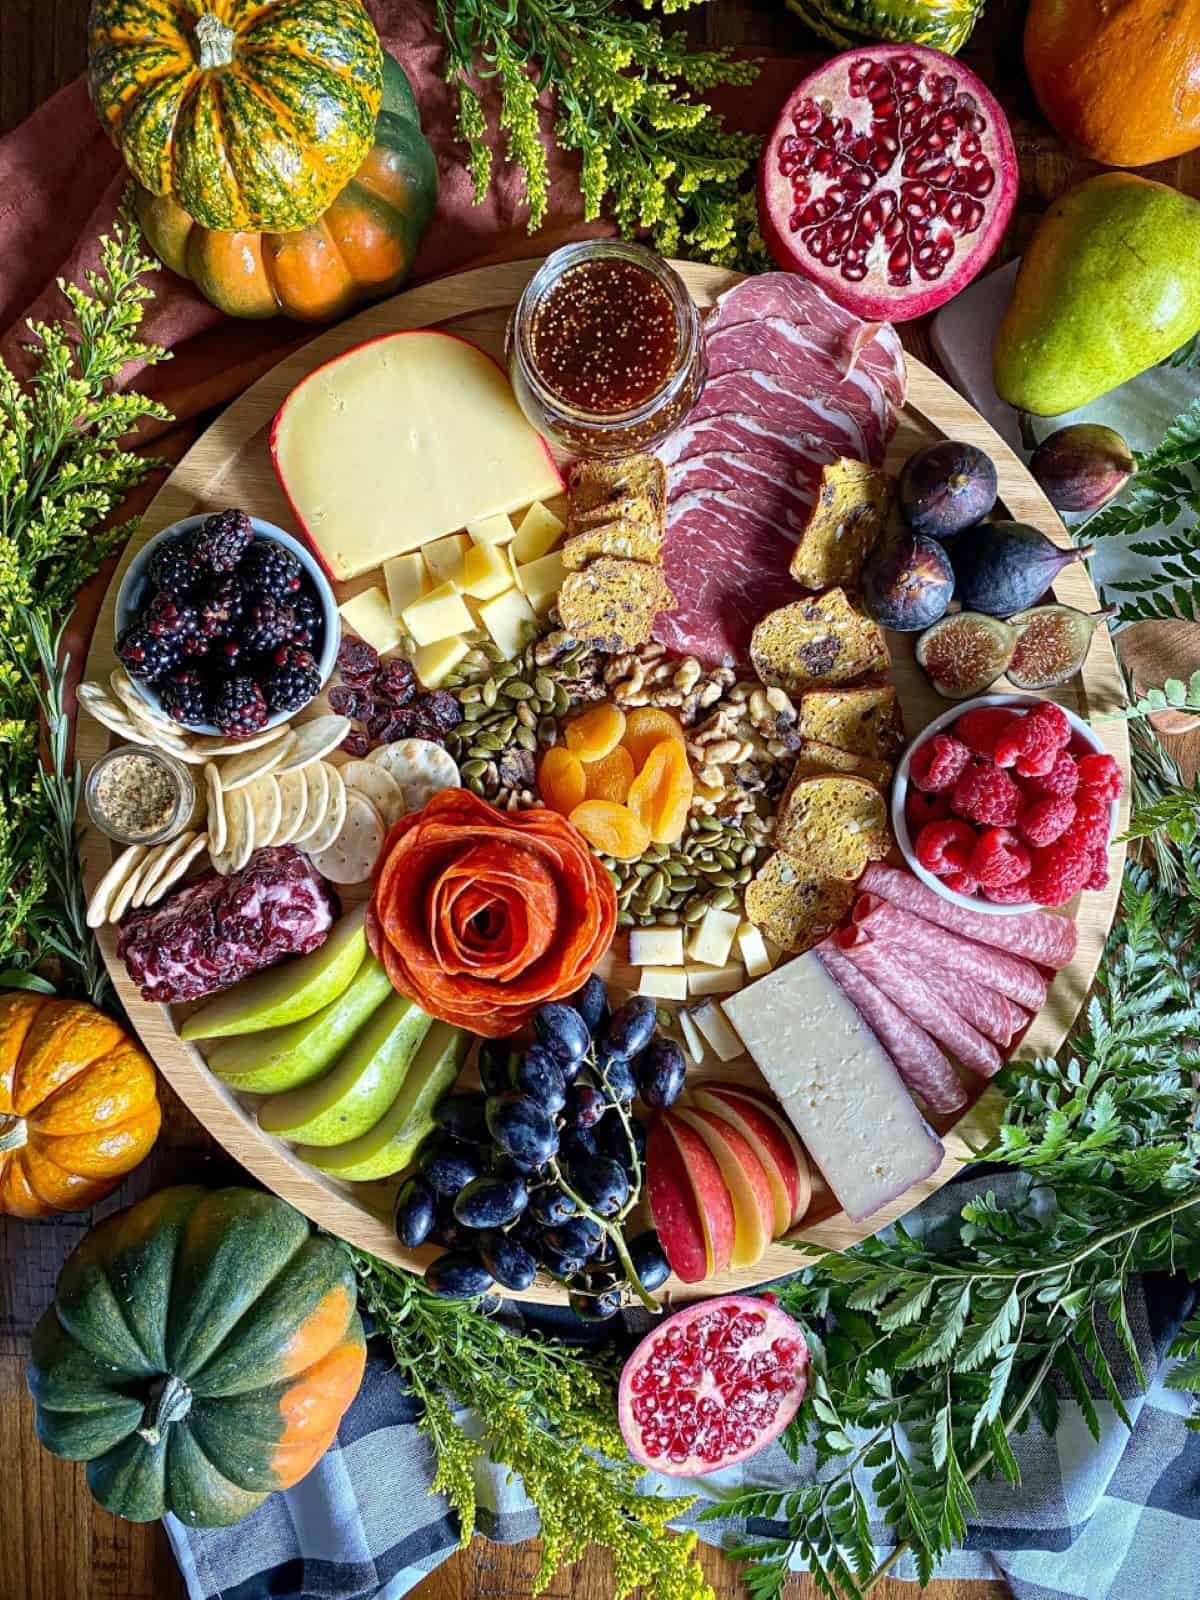 A fall charcuterie board arranged with three different types of cheese and variety of fruit and meat are on a round wooden board. Greenery and fresh pumpkins surround the board.